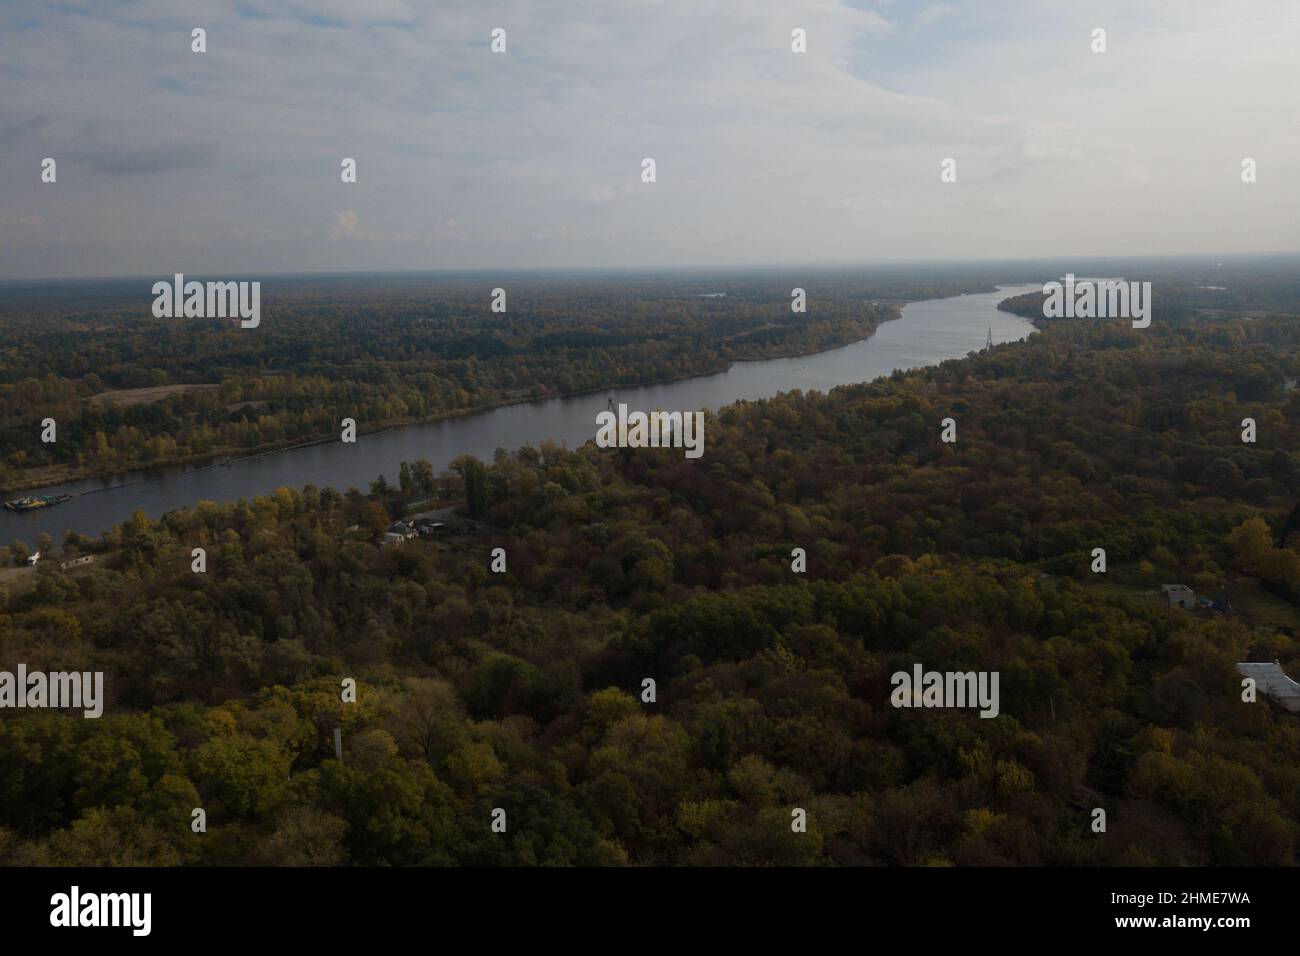 Aerial views of the Pripyat River and the surrounding forest from Chernobyl, Ukraine, near the Chernobyl Nuclear Power Plant. Stock Photo